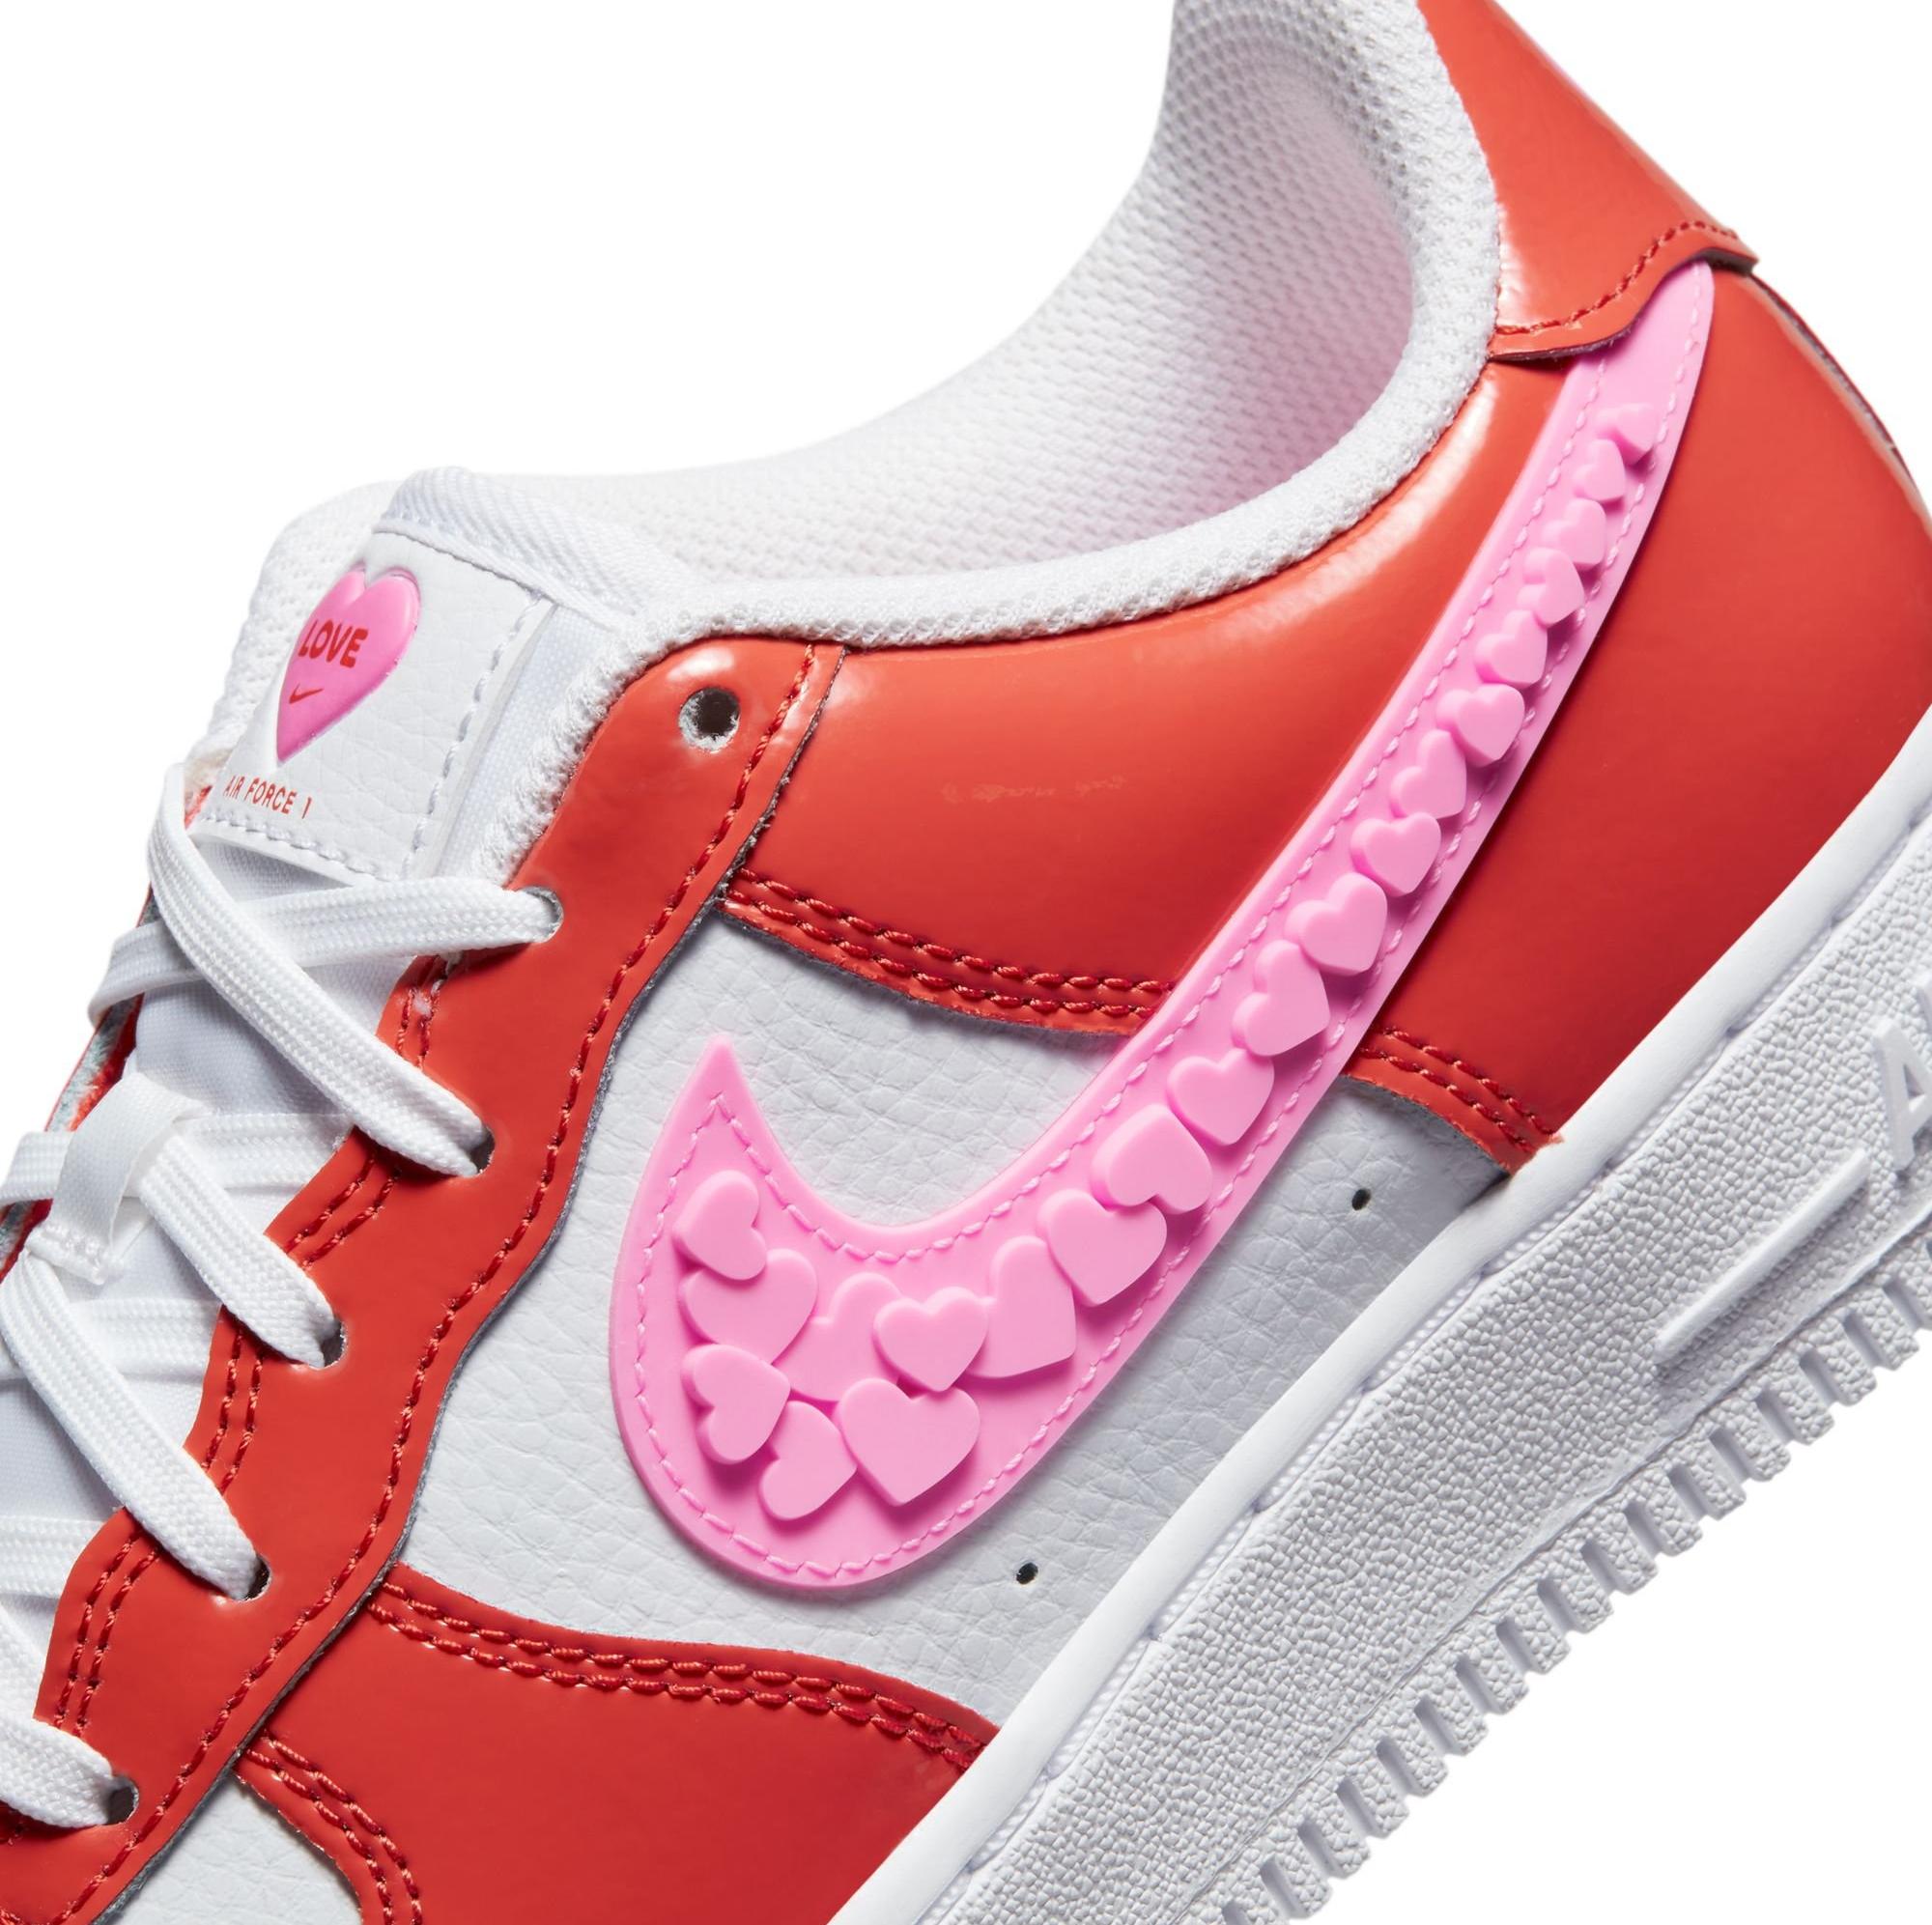 Nike air valentines day. Nike Air Force Valentines Day 2023. Nike Air Force 1 Valentine's Day 2023. Nike Air Force 1 Low “Valentine’s Day” 2023. Nike Air Force 1 Valentines Day.